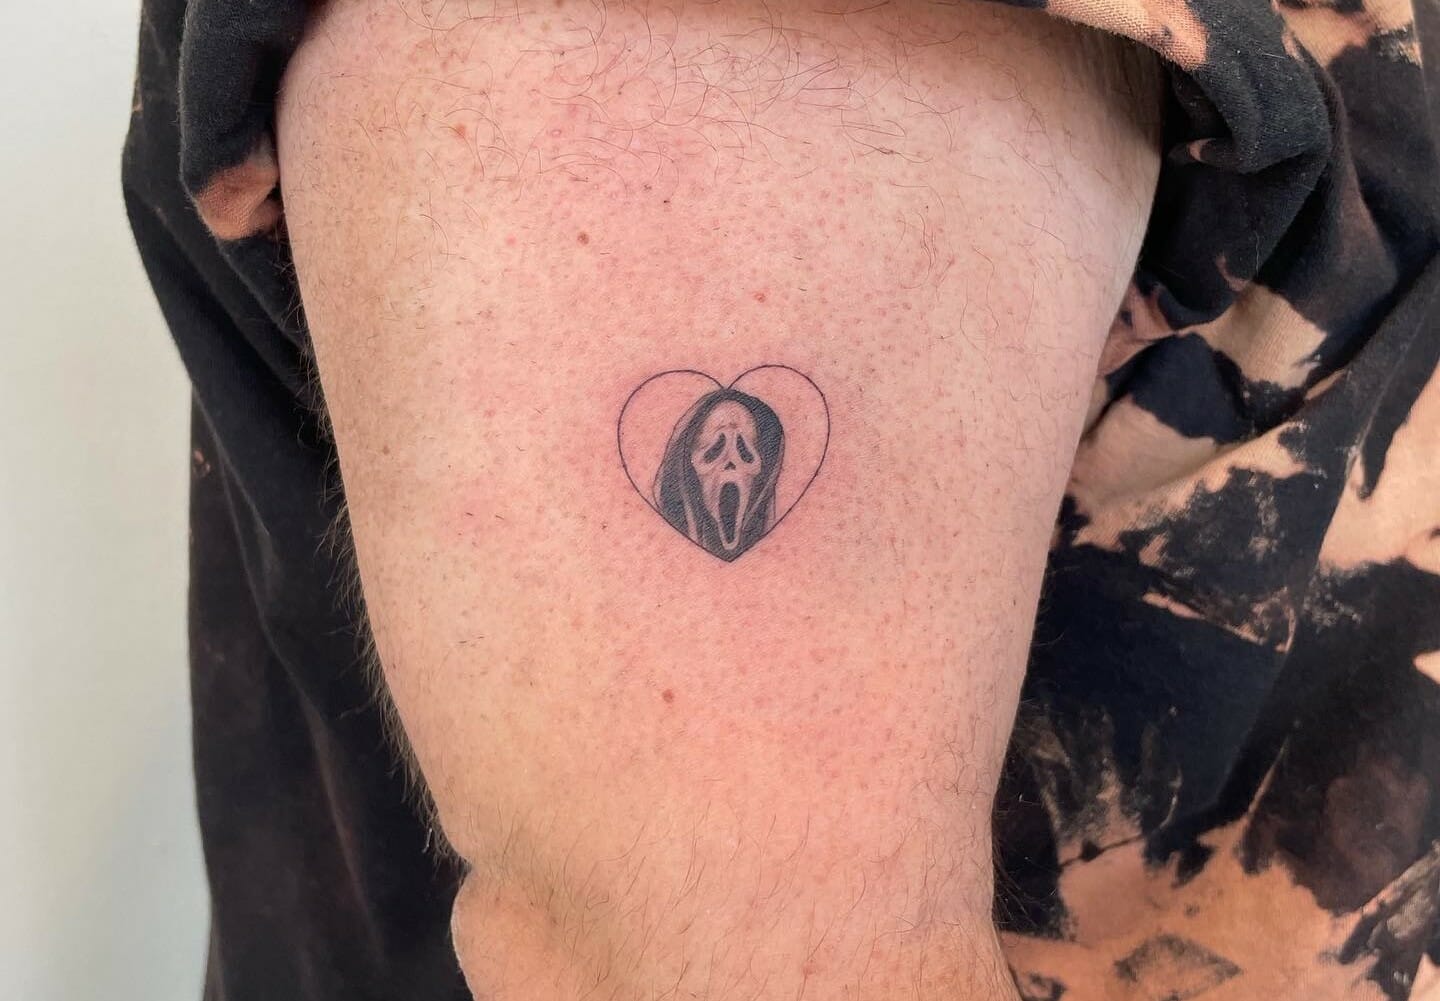 For the user who wanted to see the Scream VHS tape tattoo  rScarymovies